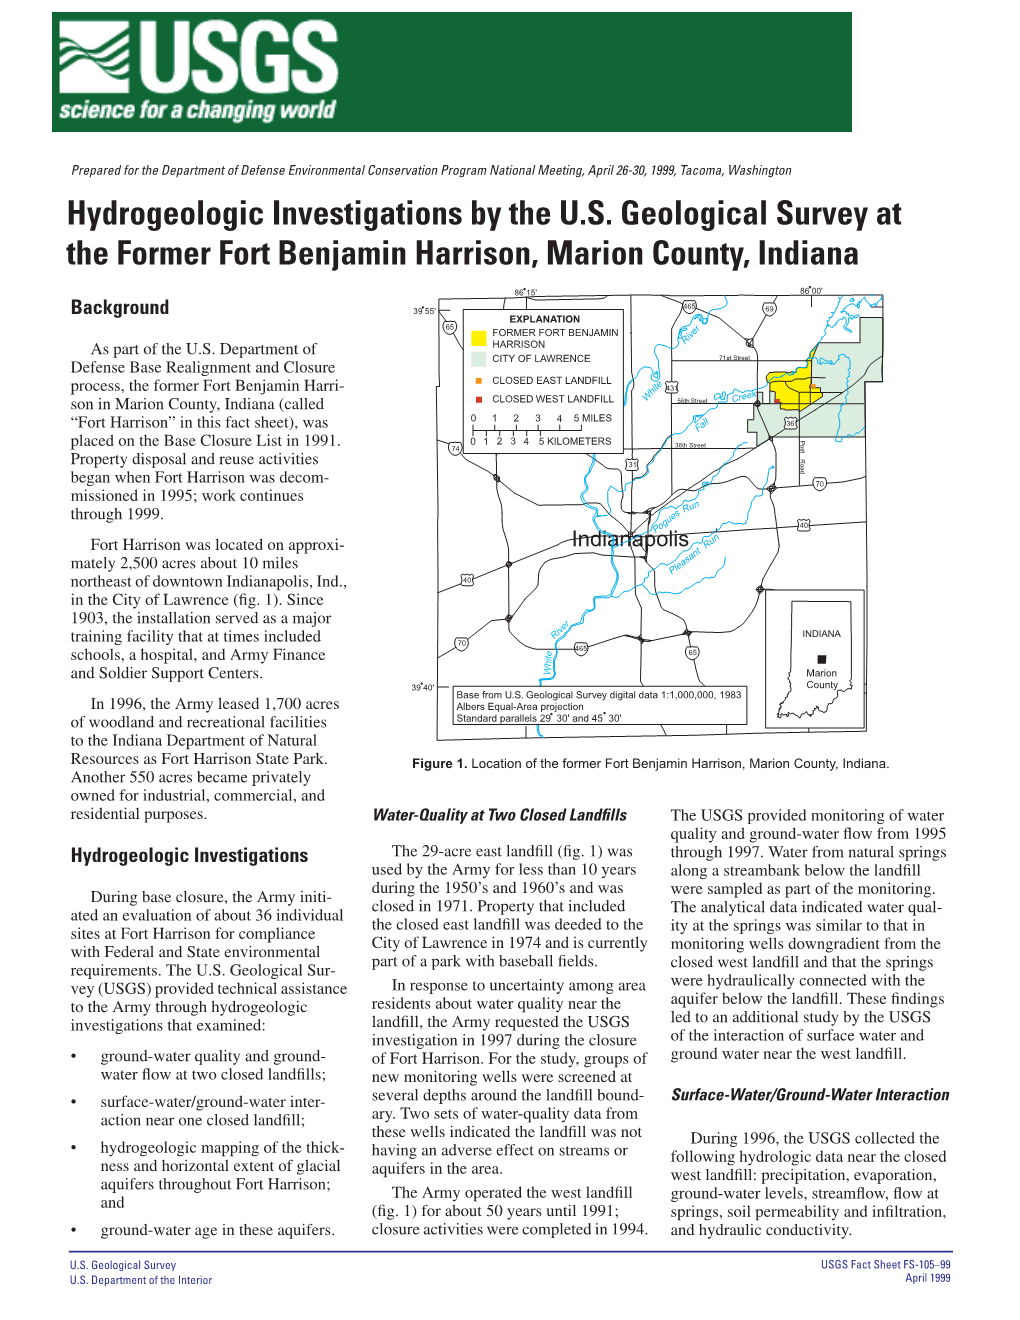 Hydrogeologic Investigations by the U.S. Geological Survey at the Former Fort Benjamin Harrison, Marion County, Indiana